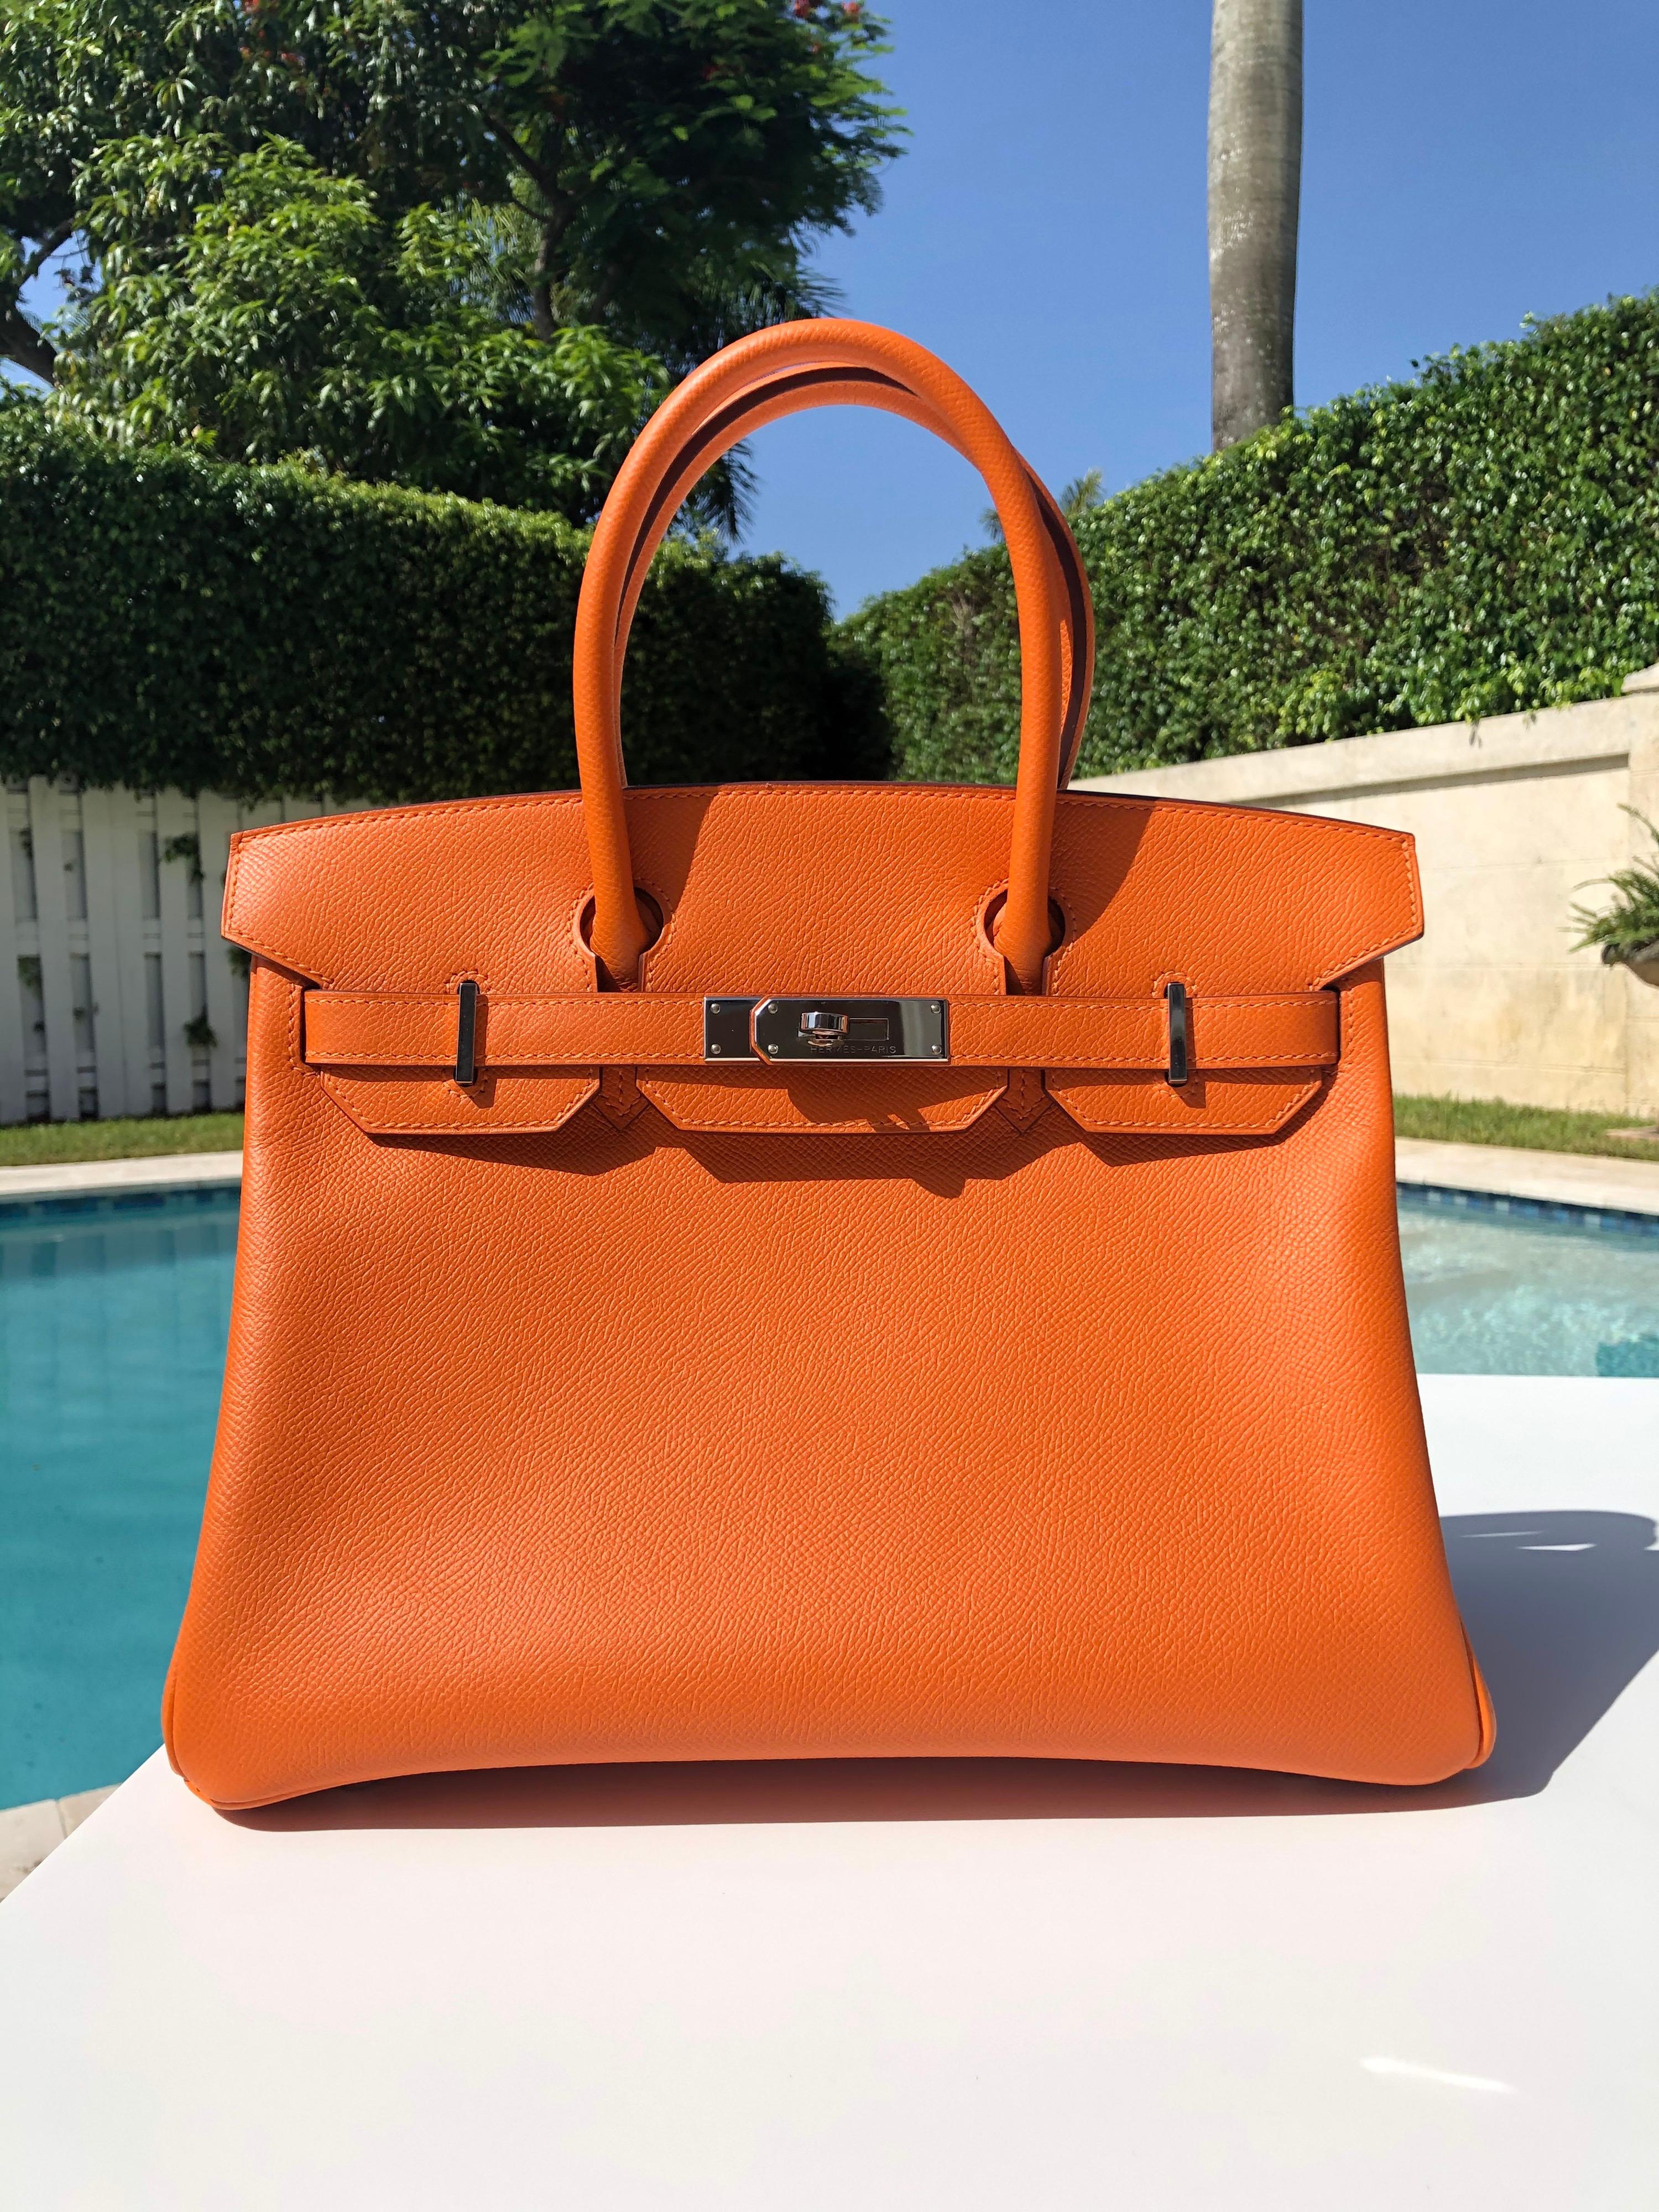 Hermes Birkin 30 Orange Epsom Palladium Hardware. Excellent Pristine Condition, very light hairlines on hardware and perfect structure and corners.

Shop with Confidence from Lux Addicts. Authenticity Guaranteed! 